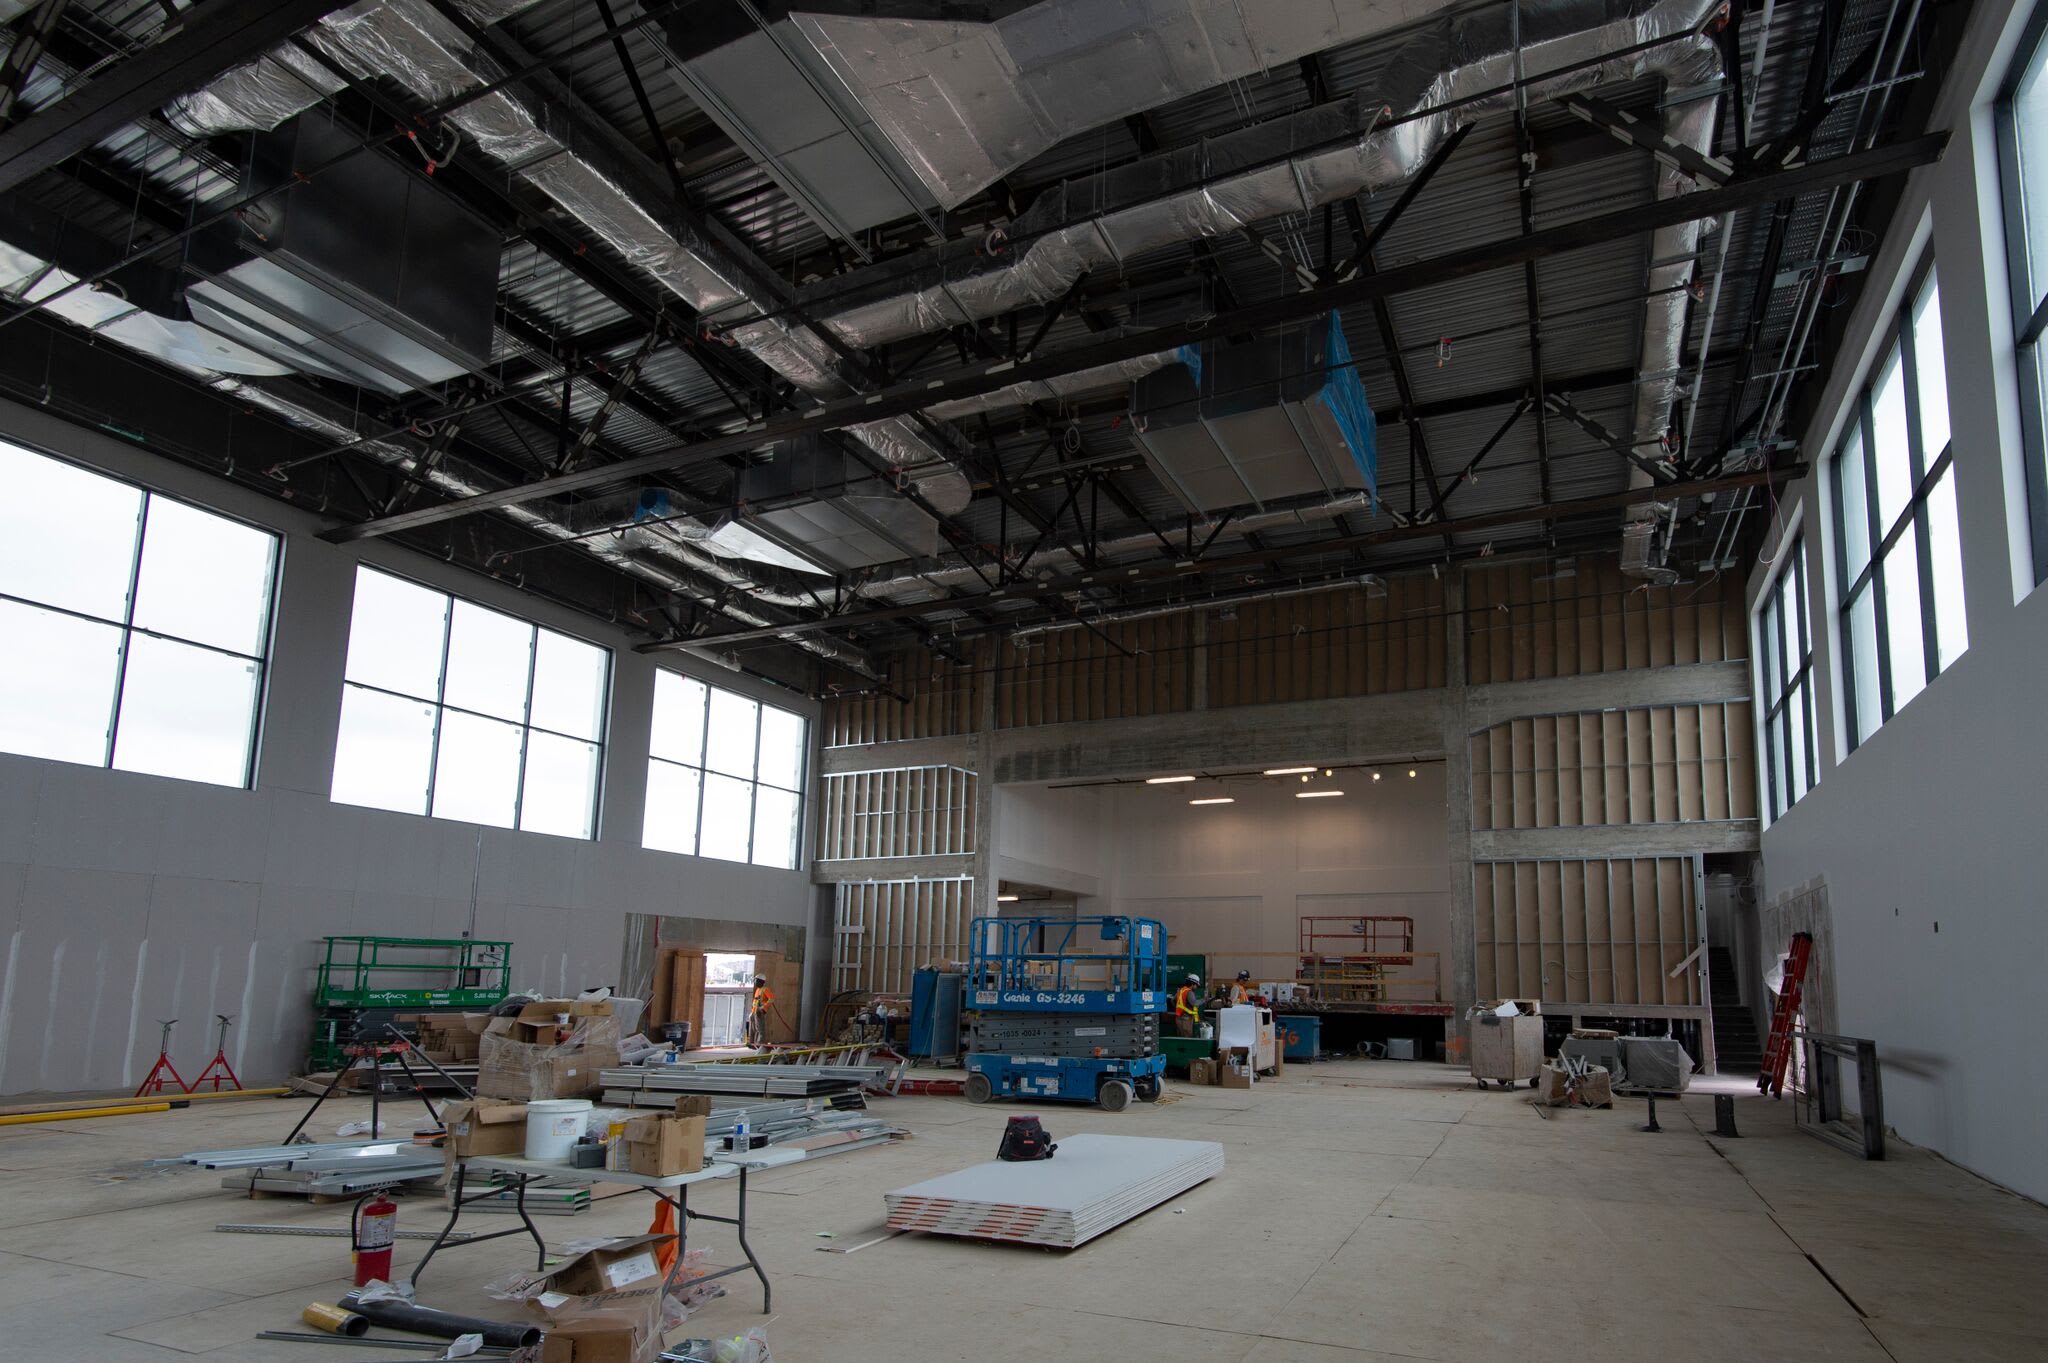 Inside the empty building, walls and ceiling are new and primed.